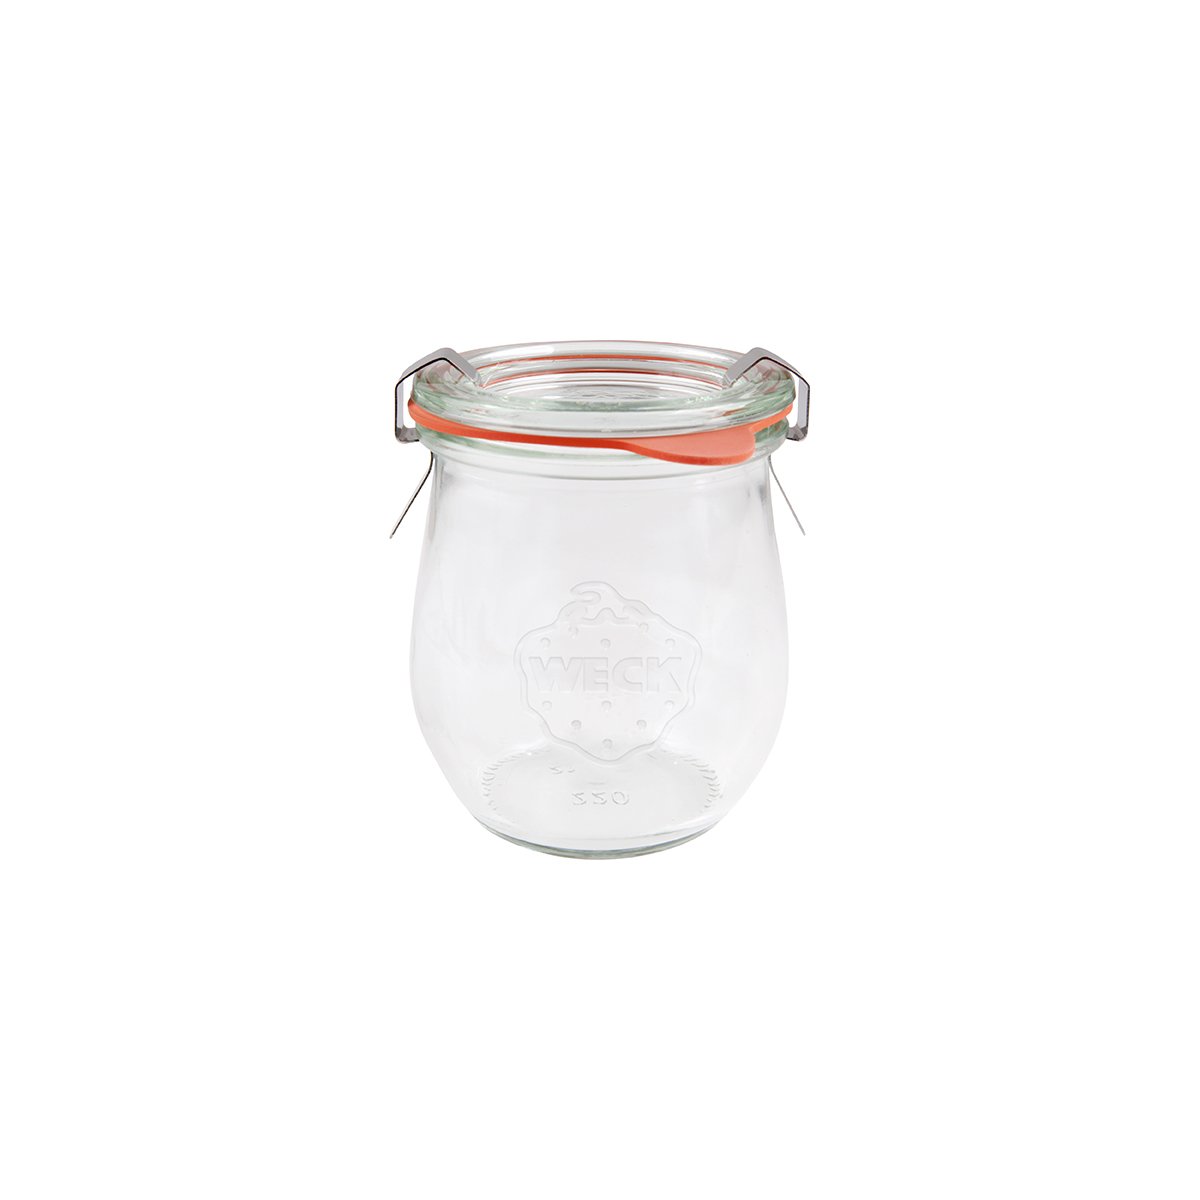 9982316 Weck Complete Glass Jar with Lid & Seal 70x80mm / 220ml Tomkin Australia Hospitality Supplies